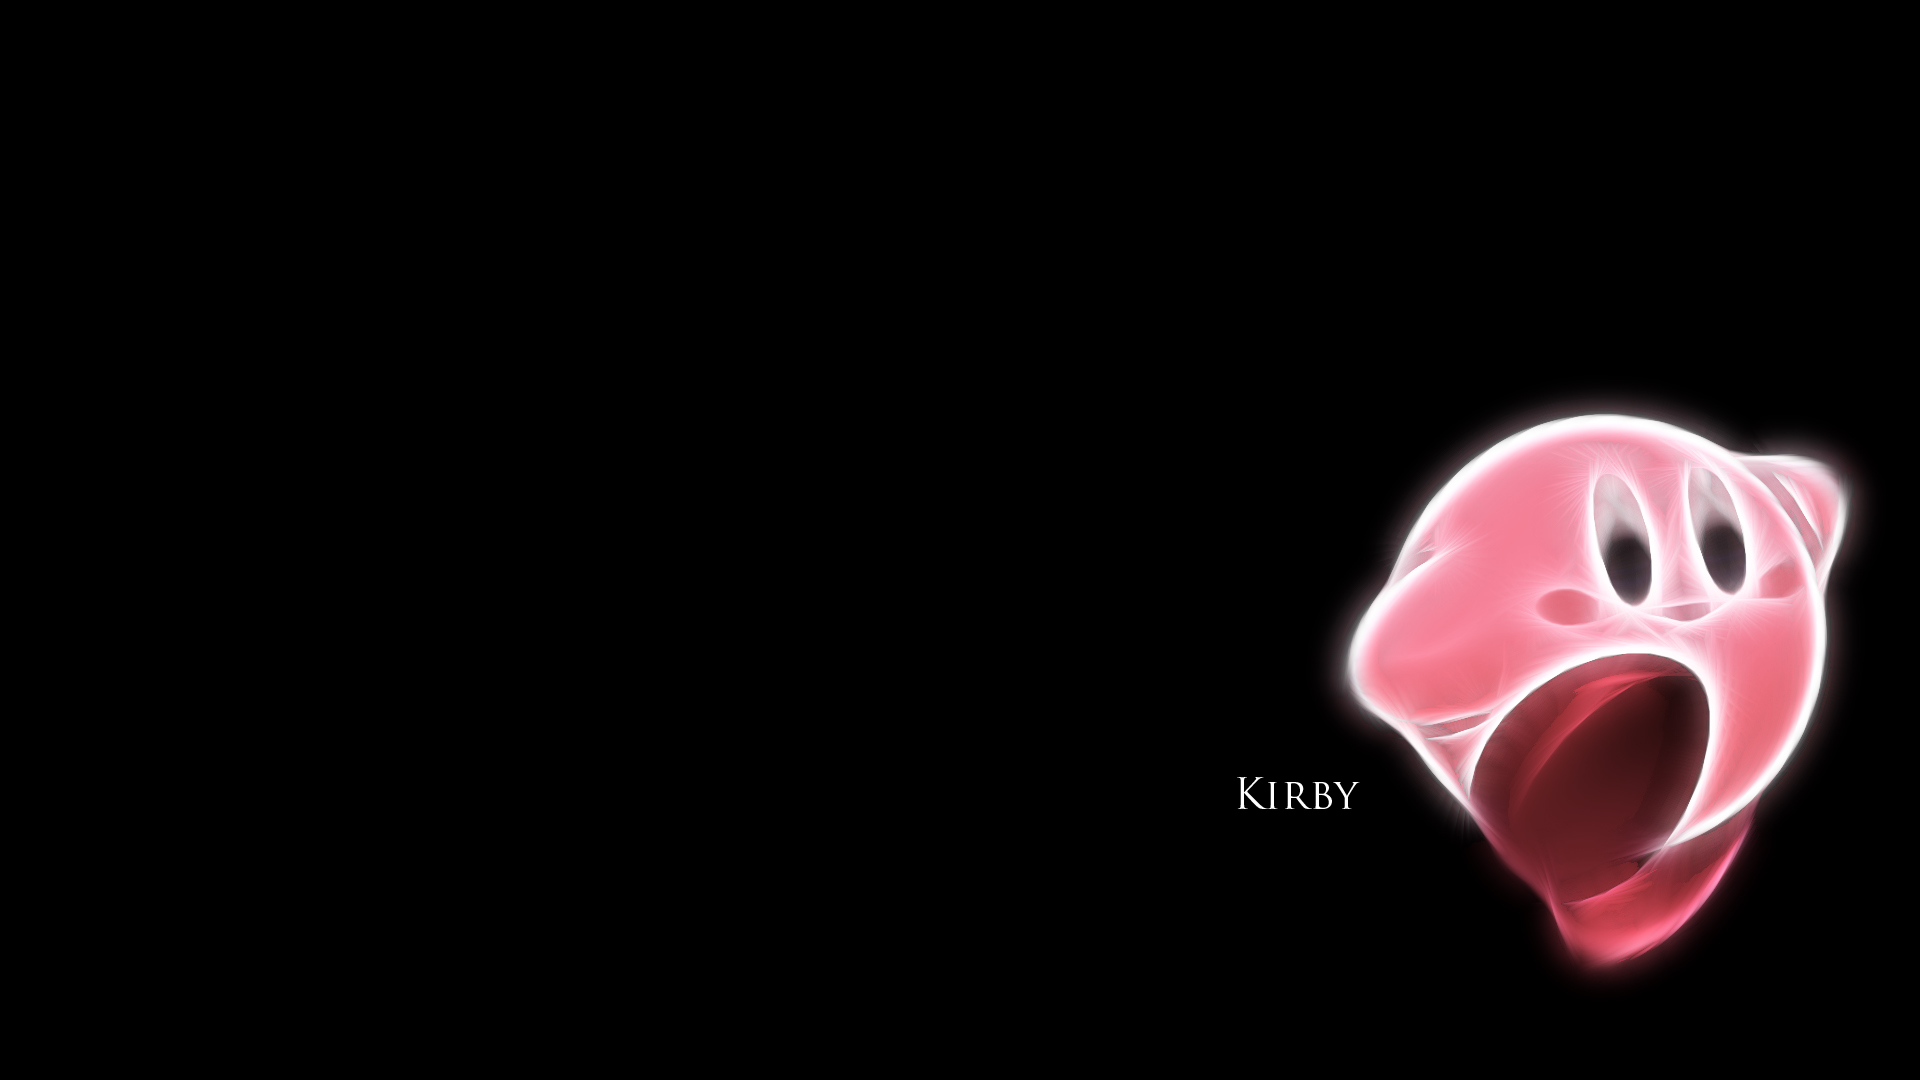  Kirby  Air Ride HD  Wallpaper  Background Image 1920x1080 